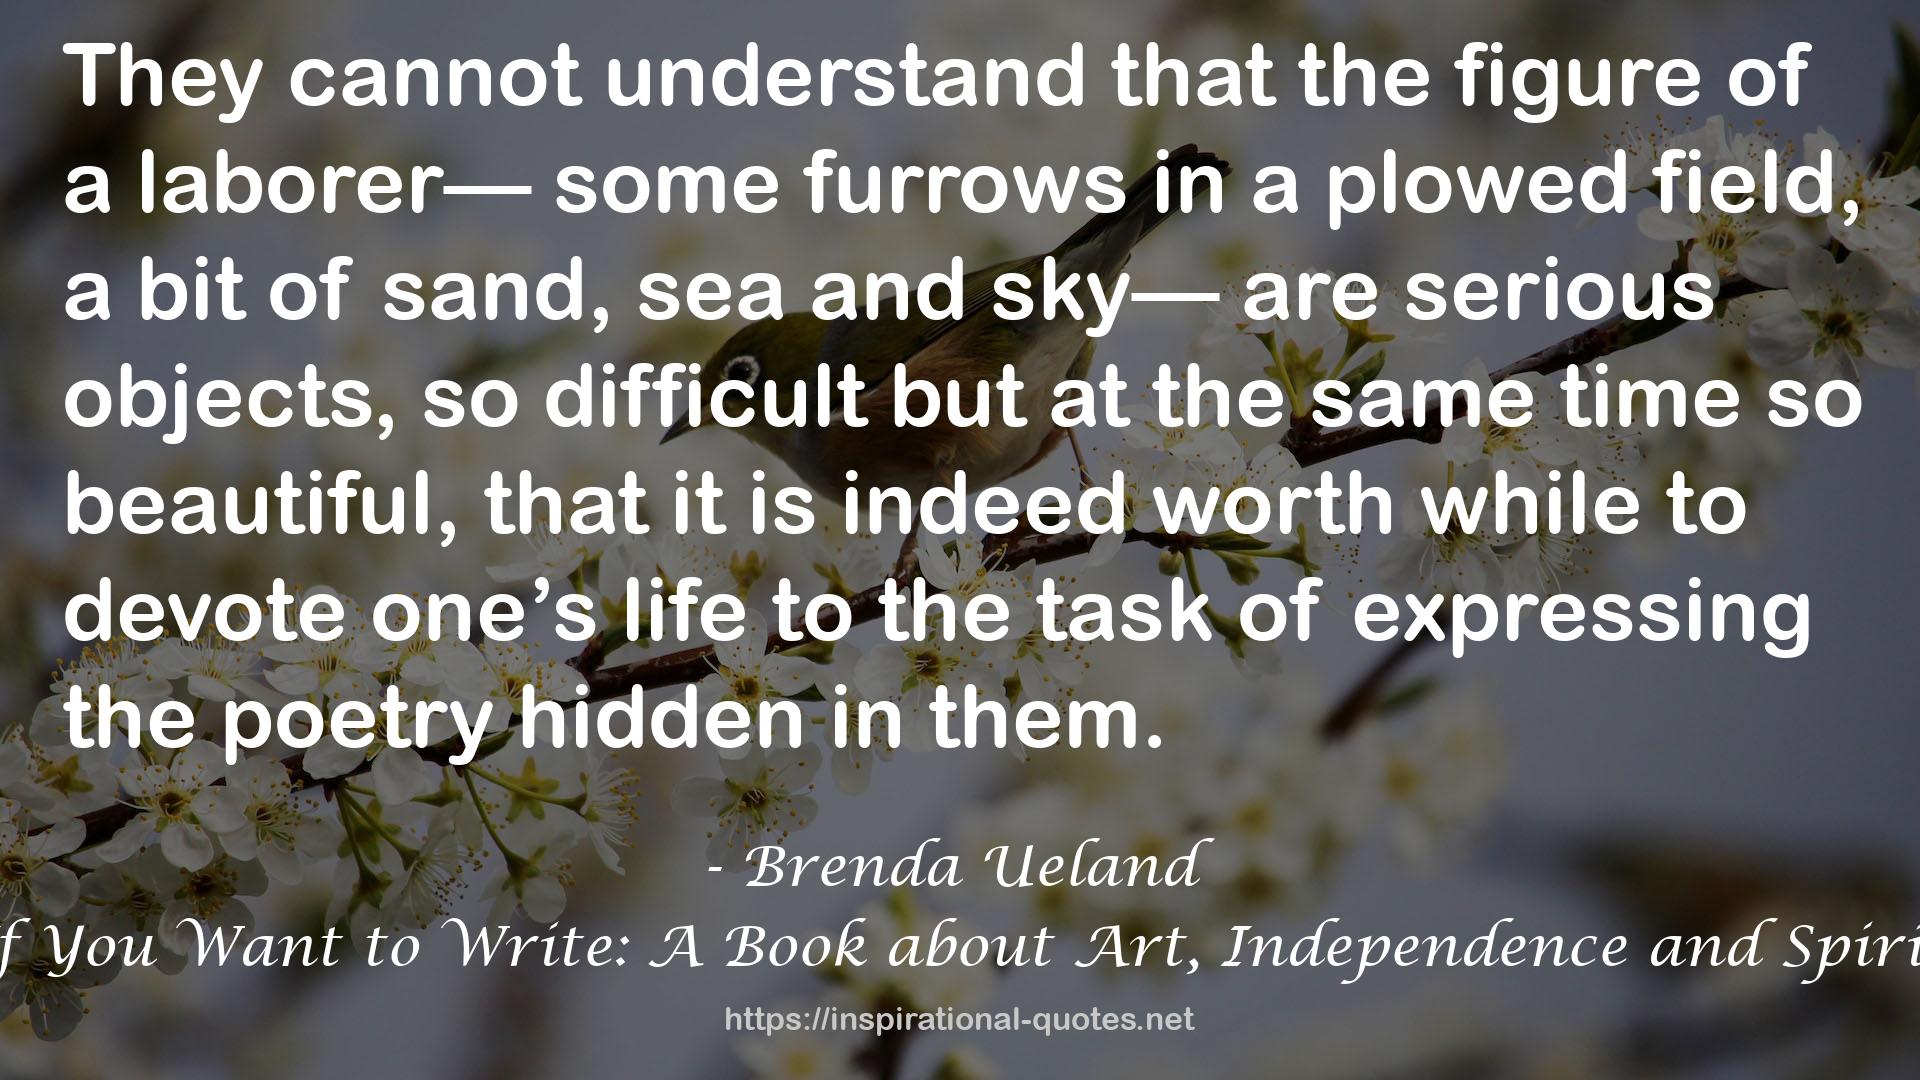 If You Want to Write: A Book about Art, Independence and Spirit QUOTES